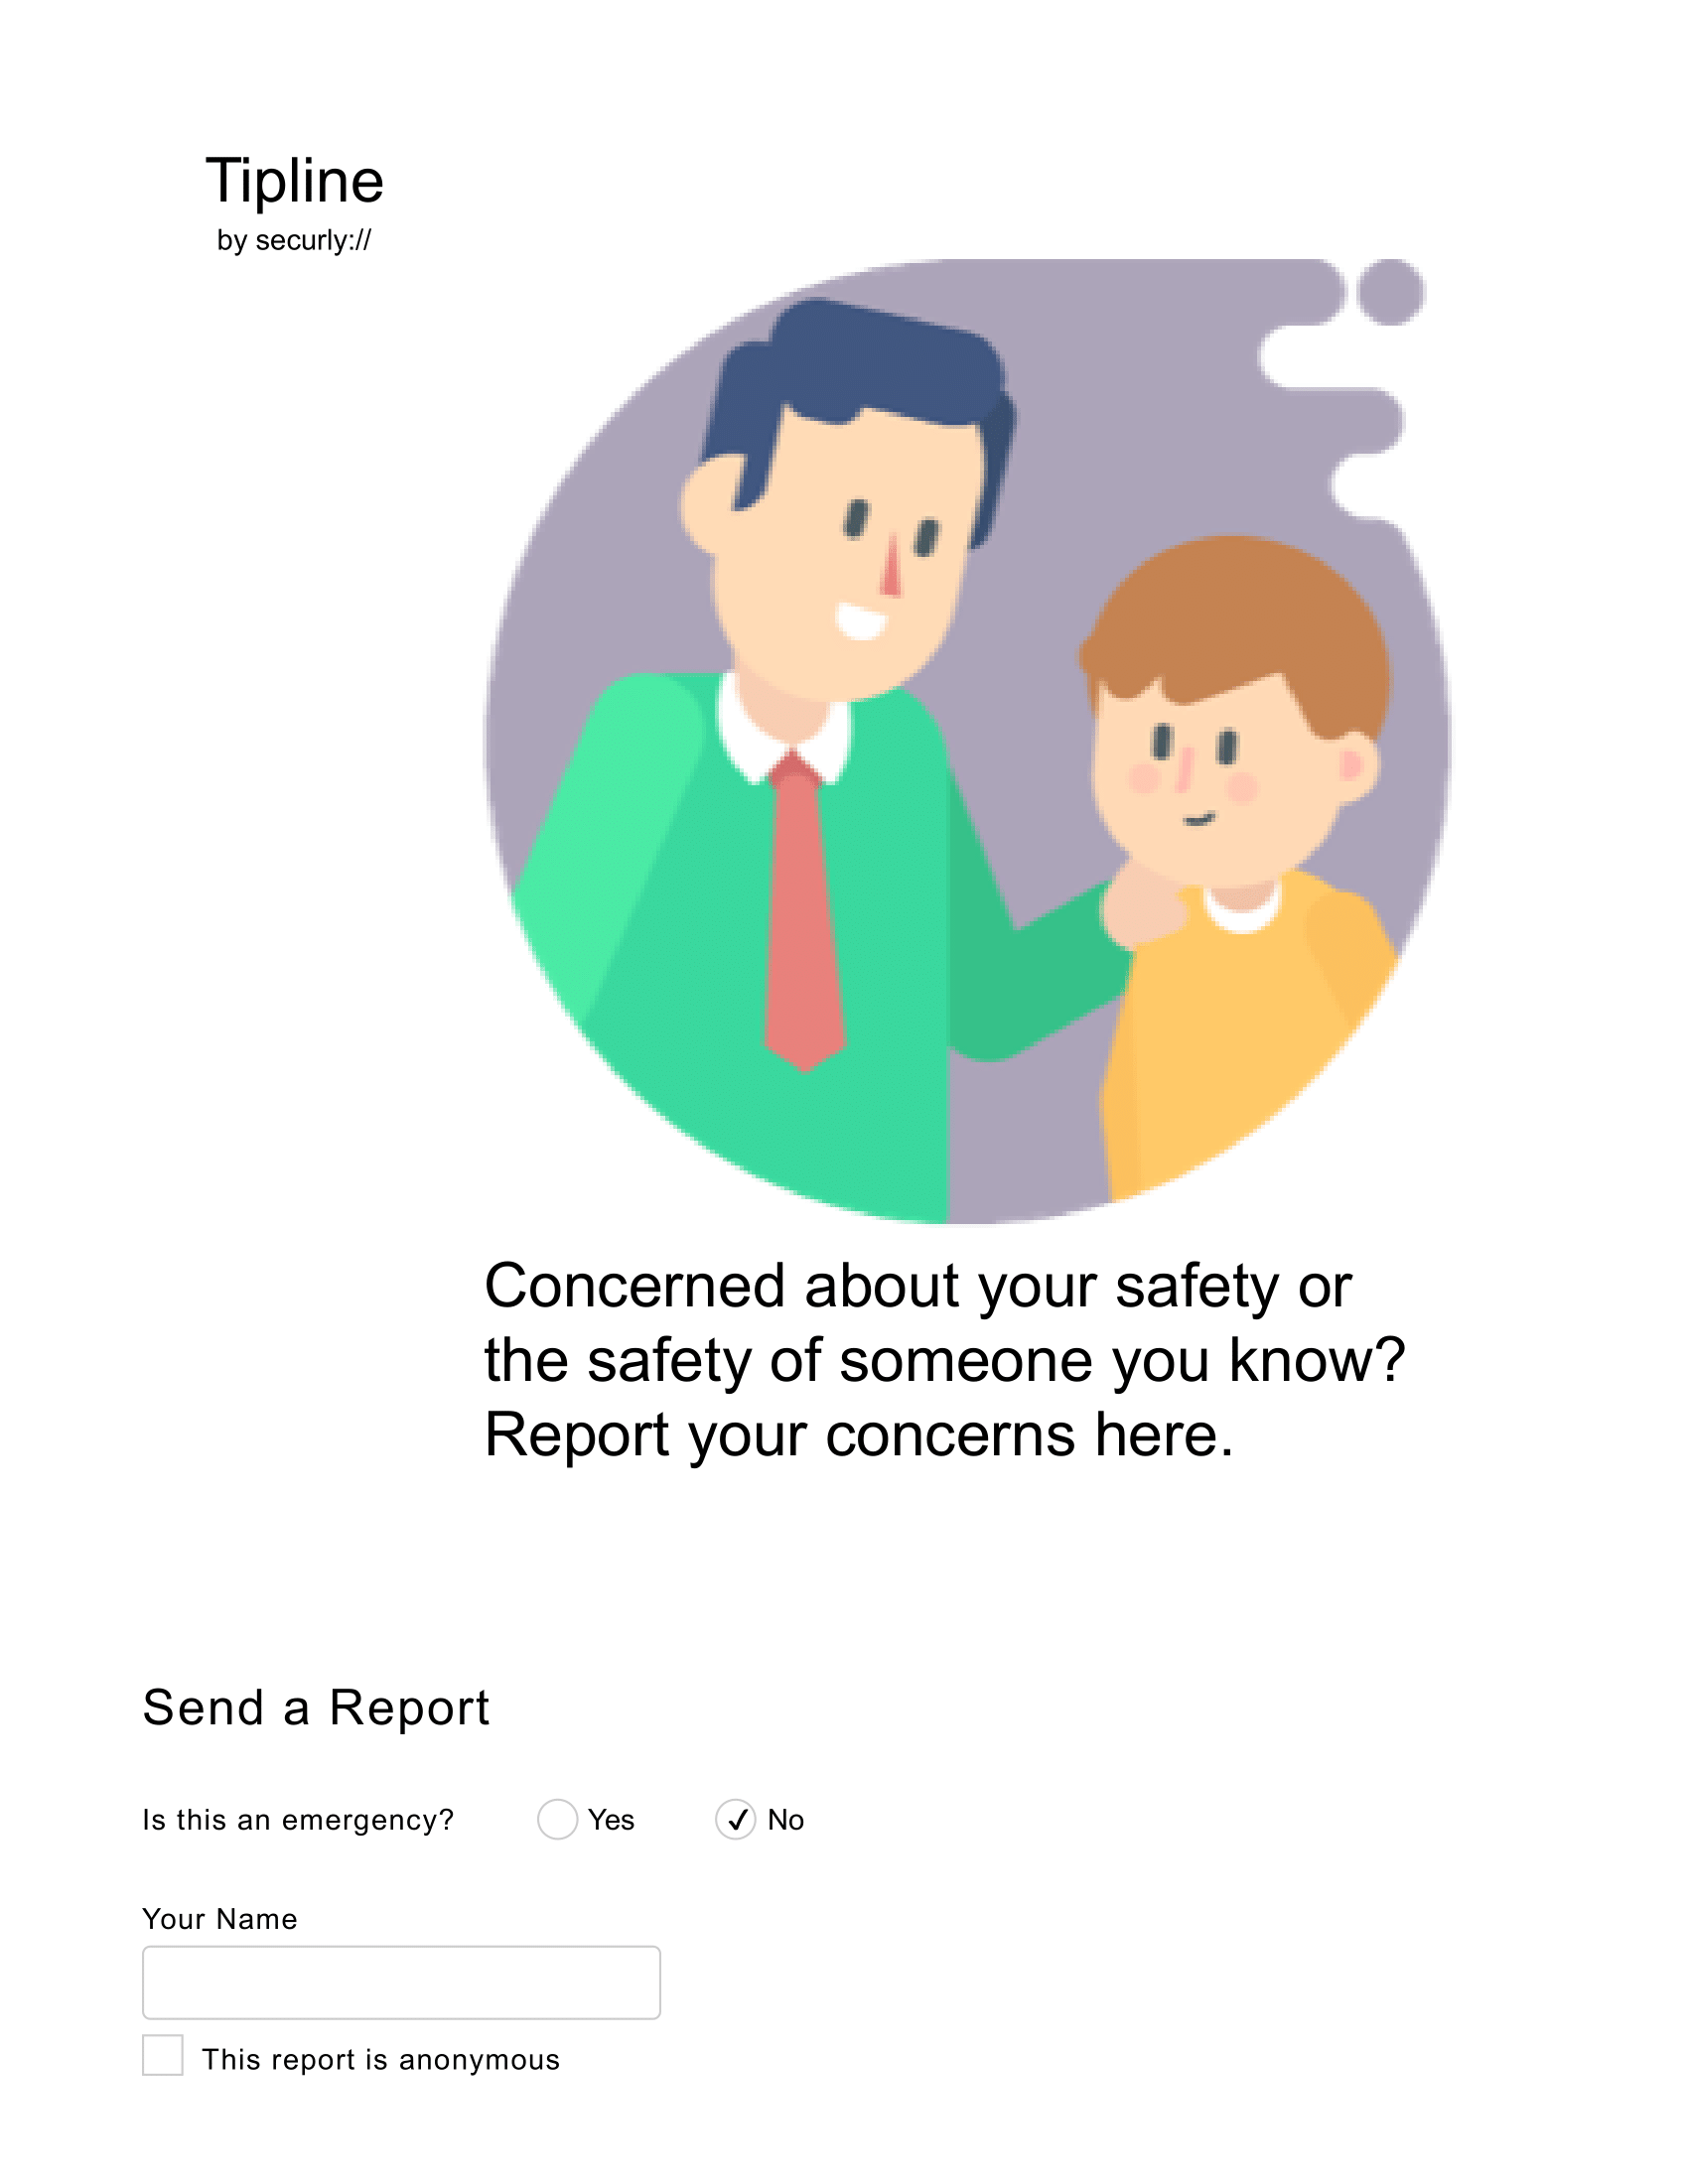 TIPLINE by securly. Concerned about your safety or the safety of someone you know? Report your concerns here. Send a report: is this an emergency? Yes/no (No radio button is selected). Your name, blank checkbox "this report is anonymous". Illustrated image of an adult man patting a young boy on the shoulder with a purple backsplash.